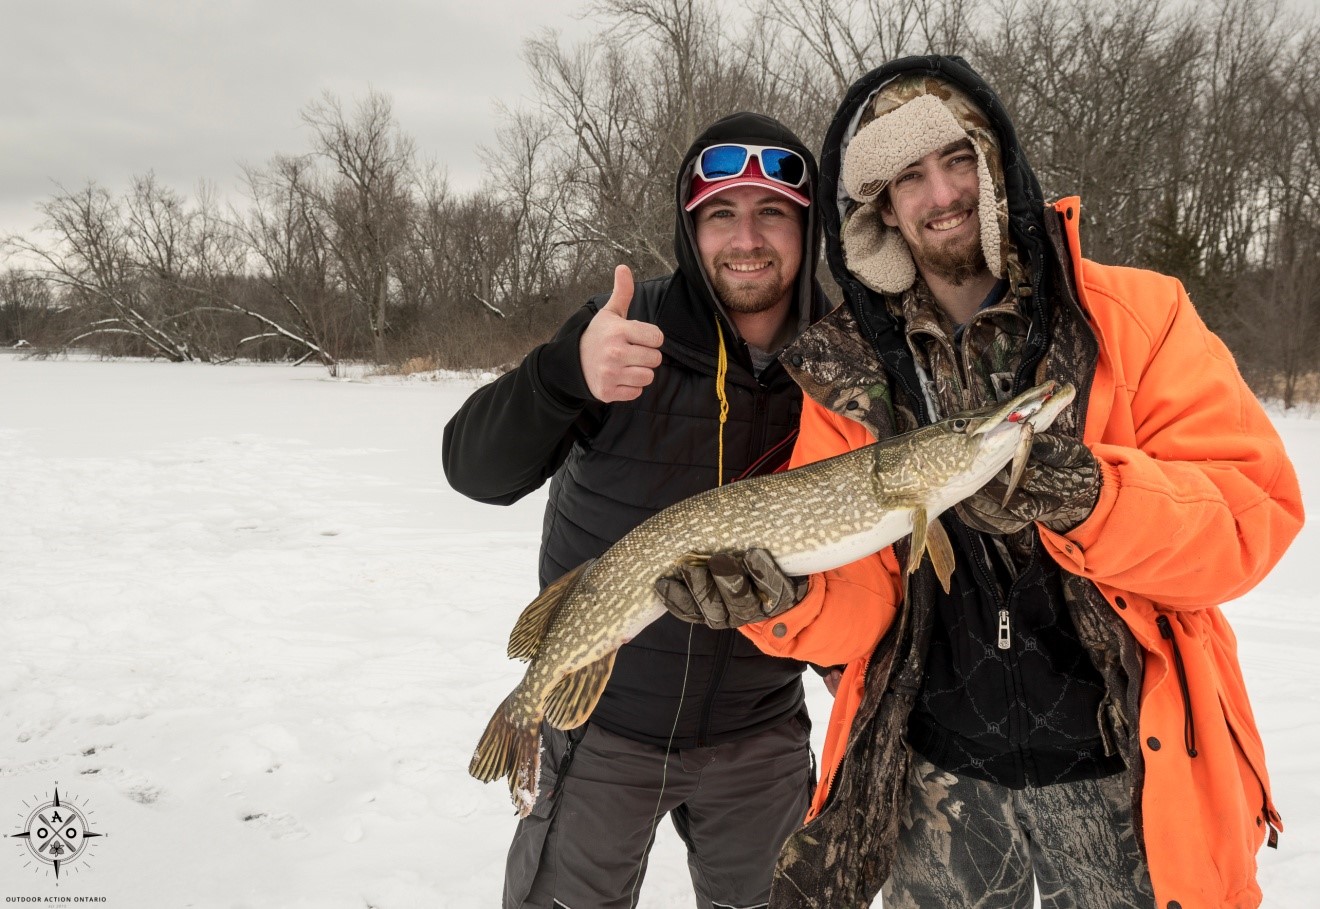 Avid Ice-anglers Andrew Allore and Matthew Heayn are shown with the fruits of their labour – a gorgeous Ontario Northern Pike.